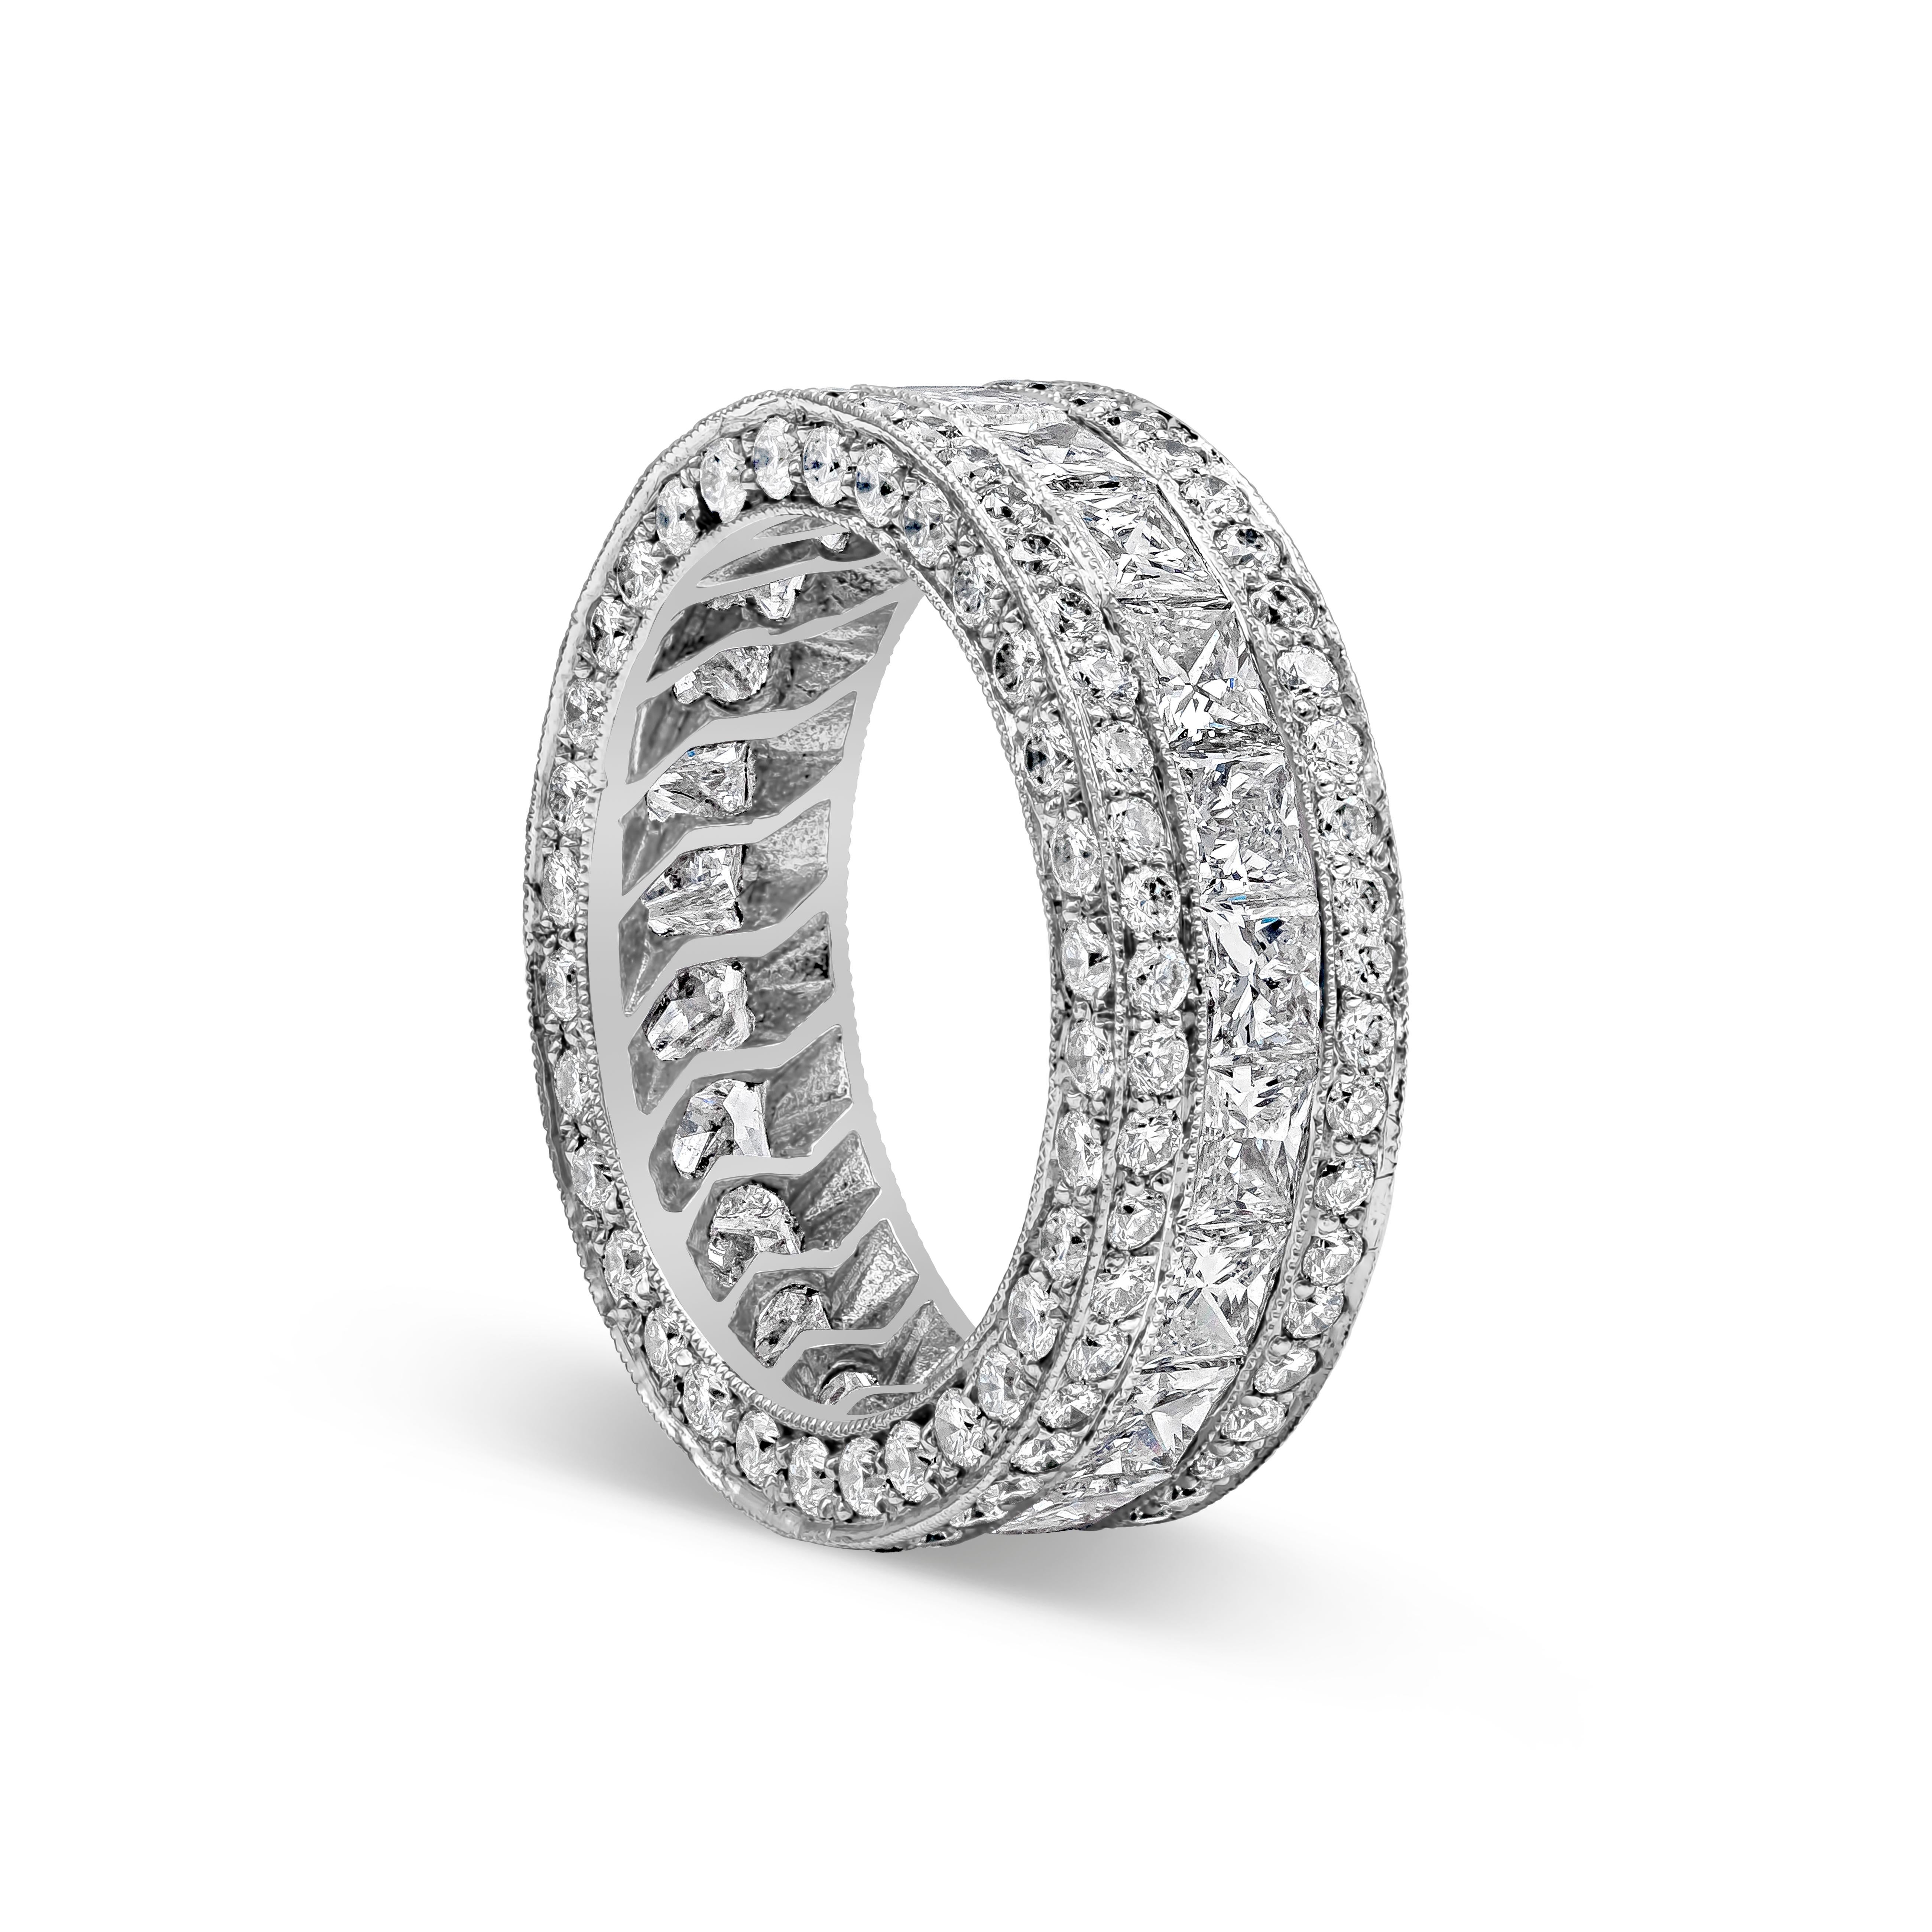 This beautiful eternity wedding band features a row of princess cut diamonds accented with two rows of round brilliant diamonds. Diamonds weighing 5.15 carats total. Made with Platinum. Size 6.5 US.

Roman Malakov is a custom house, specializing in